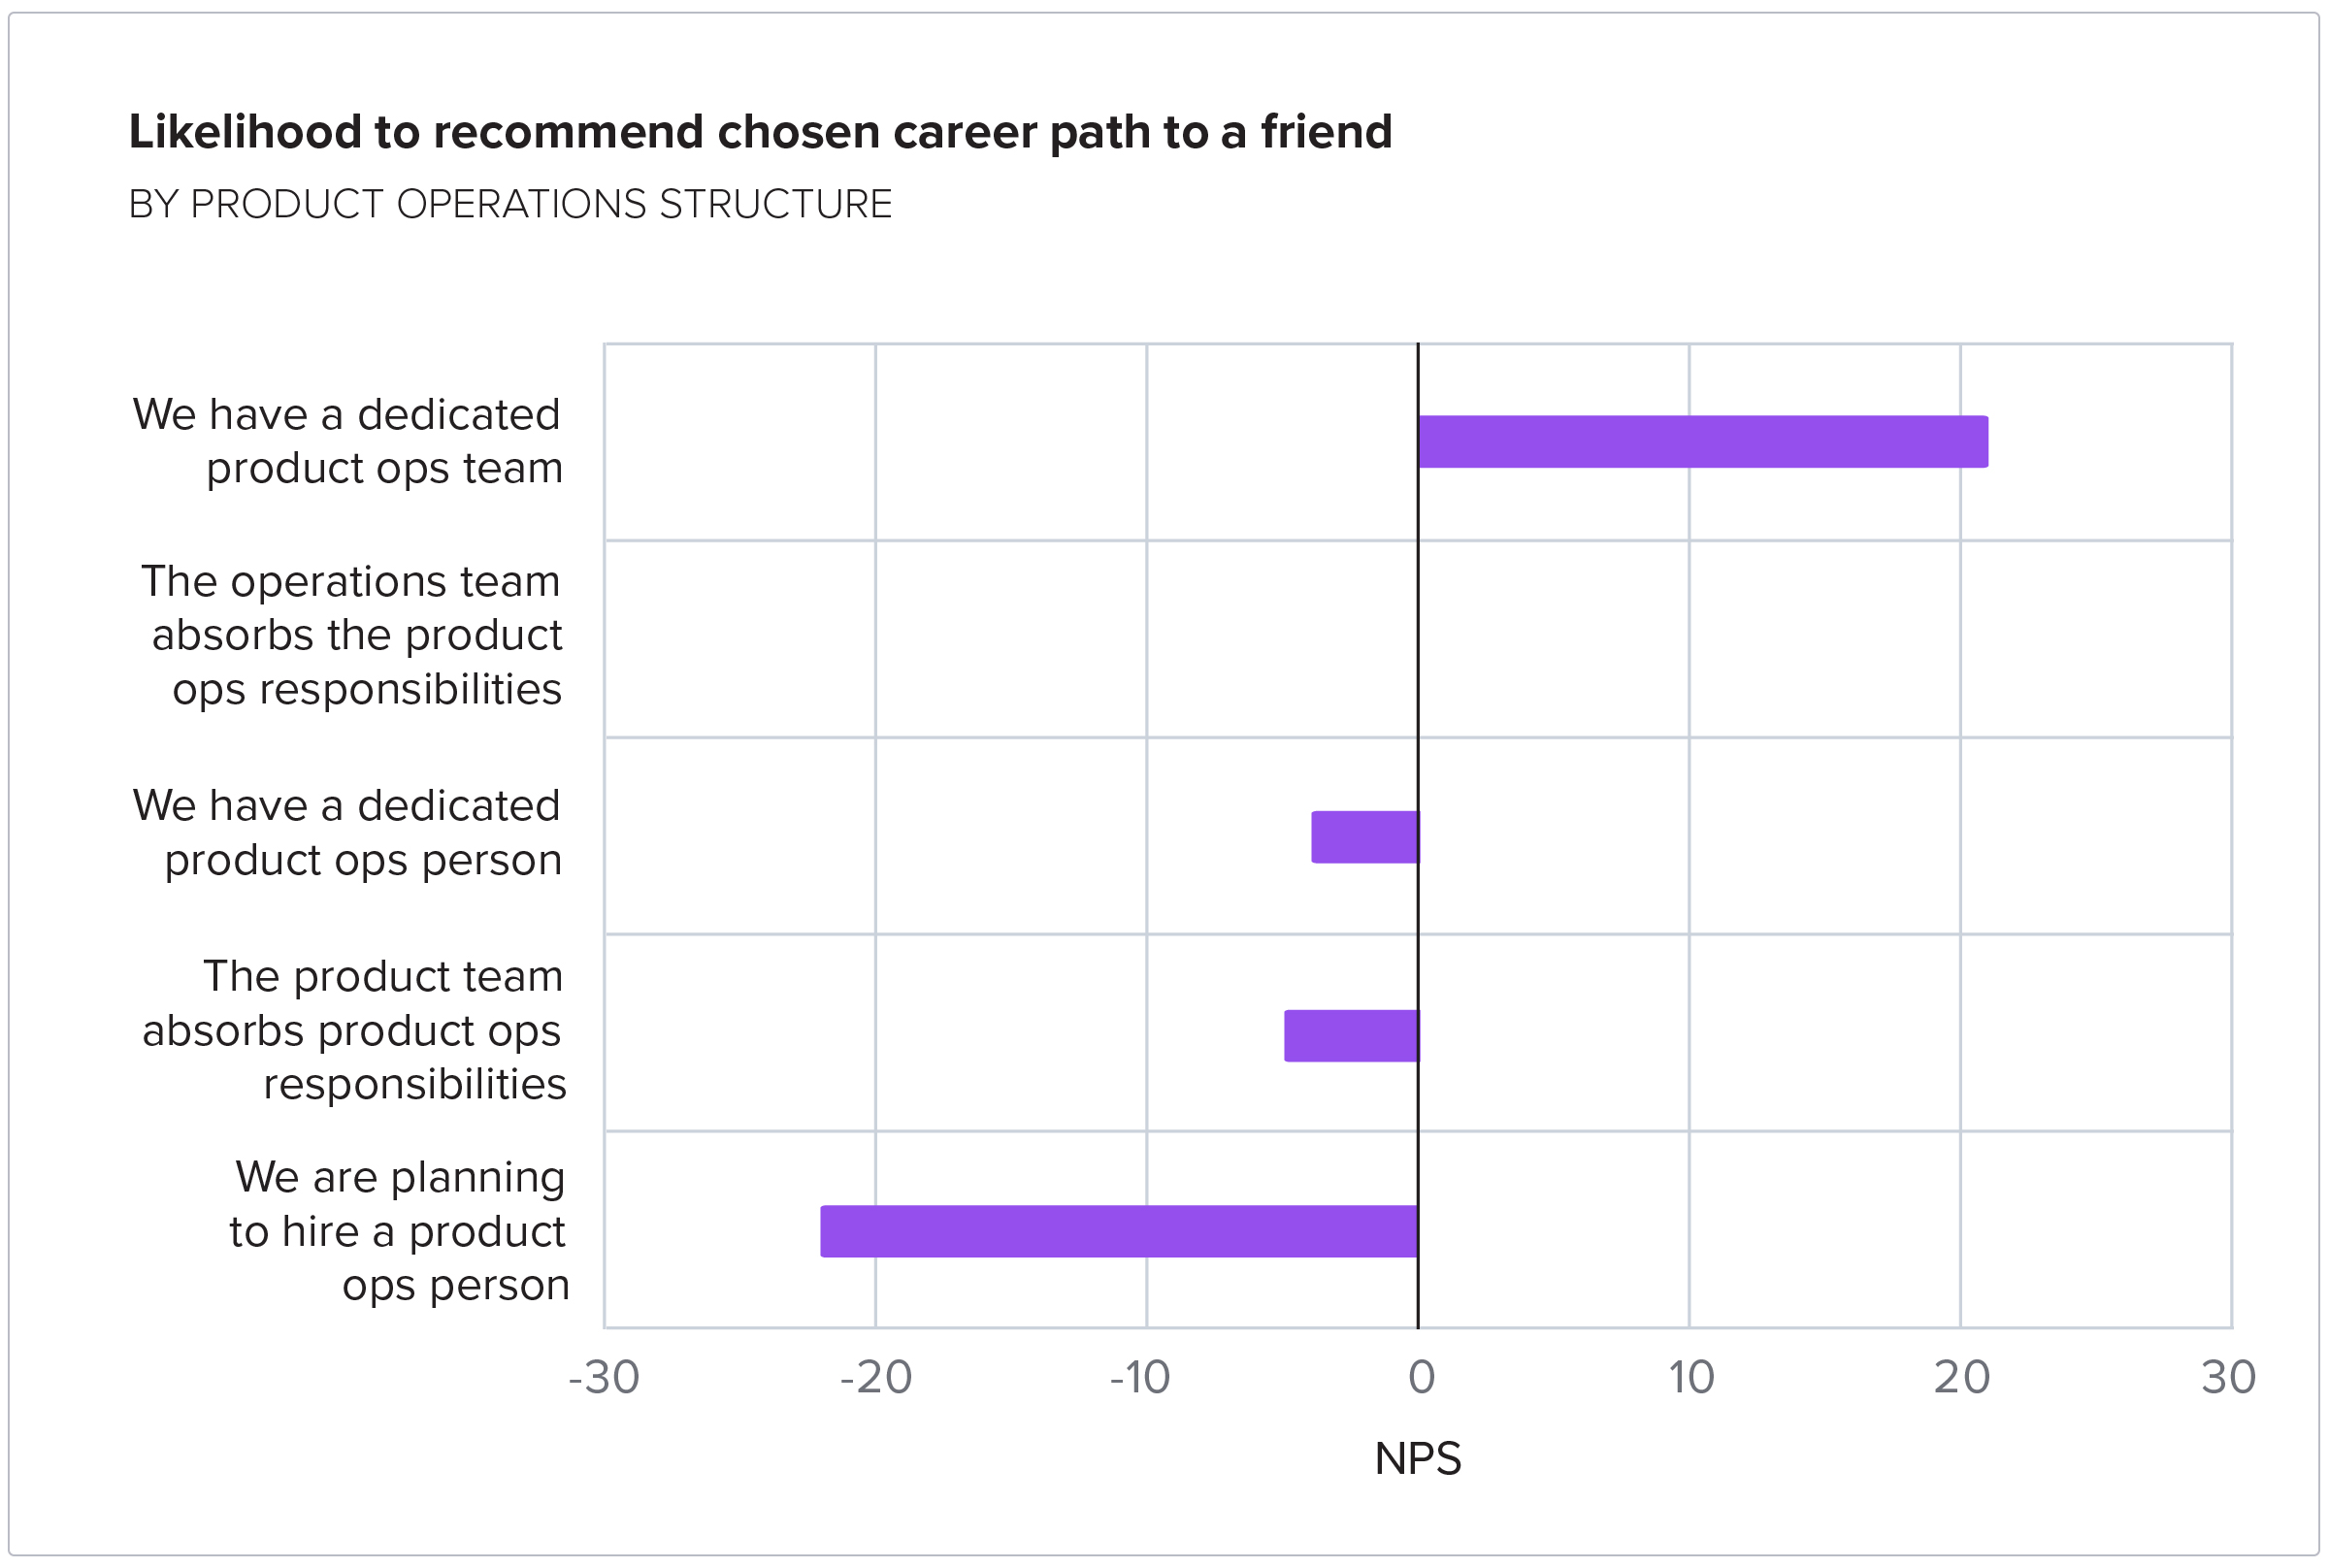 Likelihood to recommend chosen career path to a friend by product operations structure